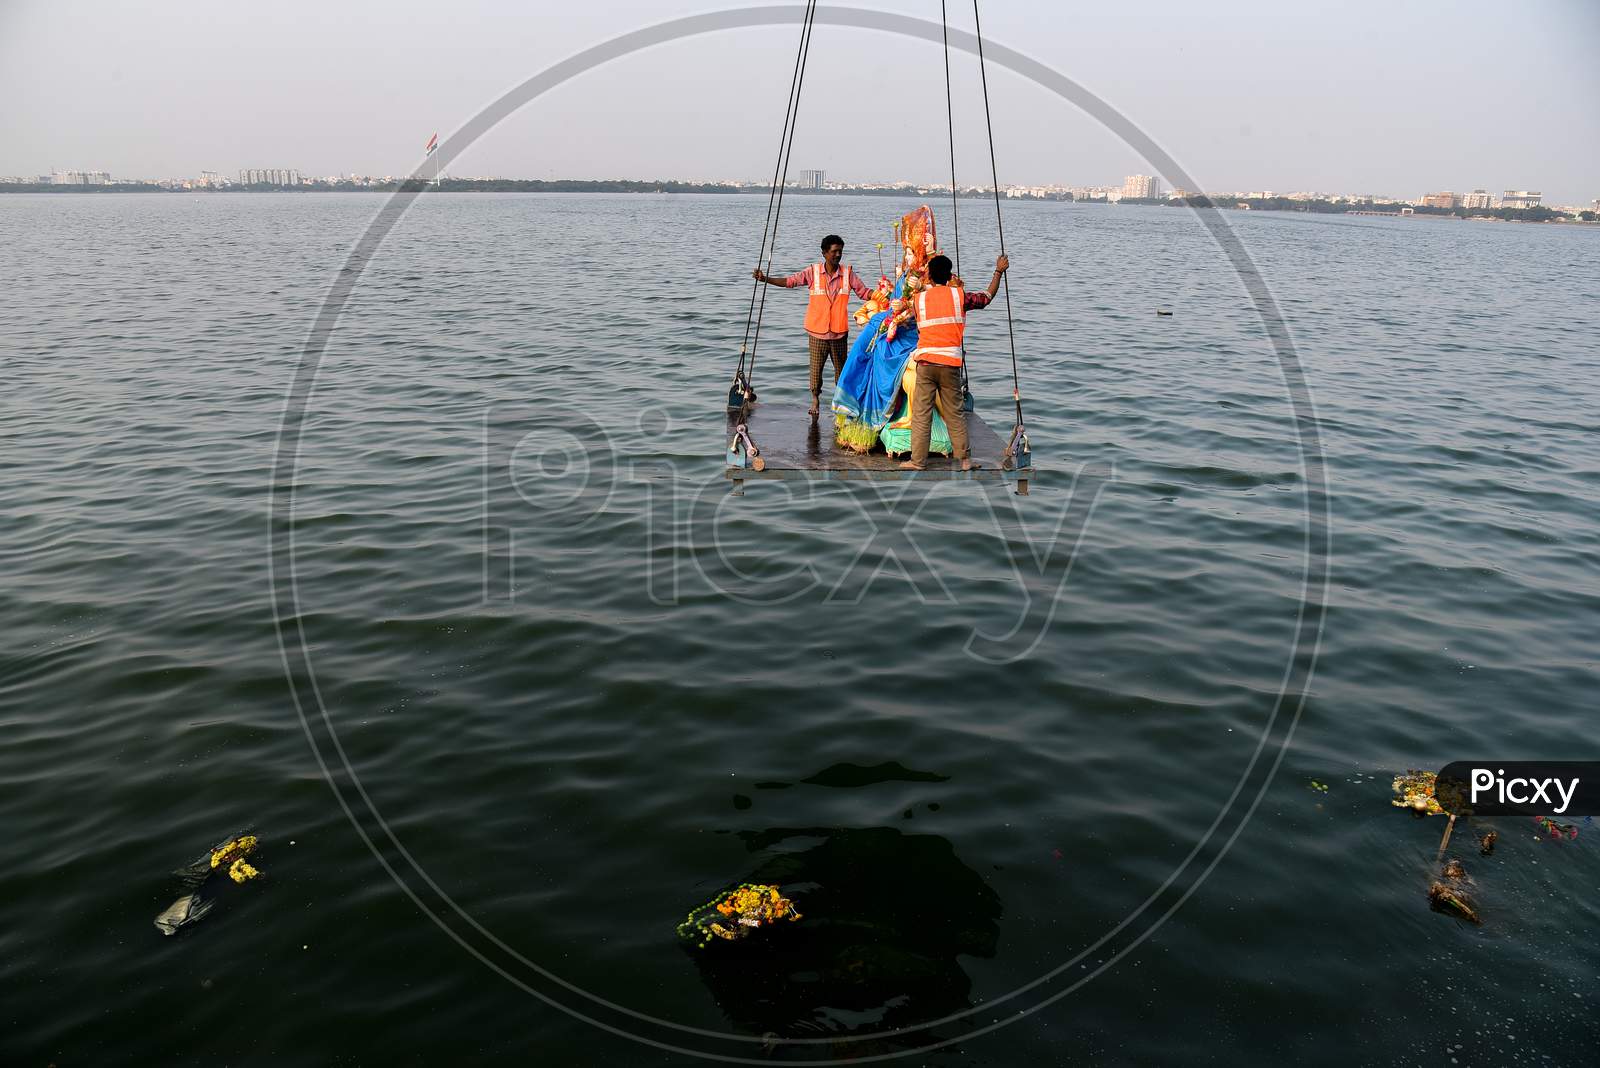 GHMC workers carry the Idols of Goddess Durga for immersion in Hussain Sagar on the last day of Navratri/Vijaya Dashami/Durga Puja in Hyderabad, October 26,2020.